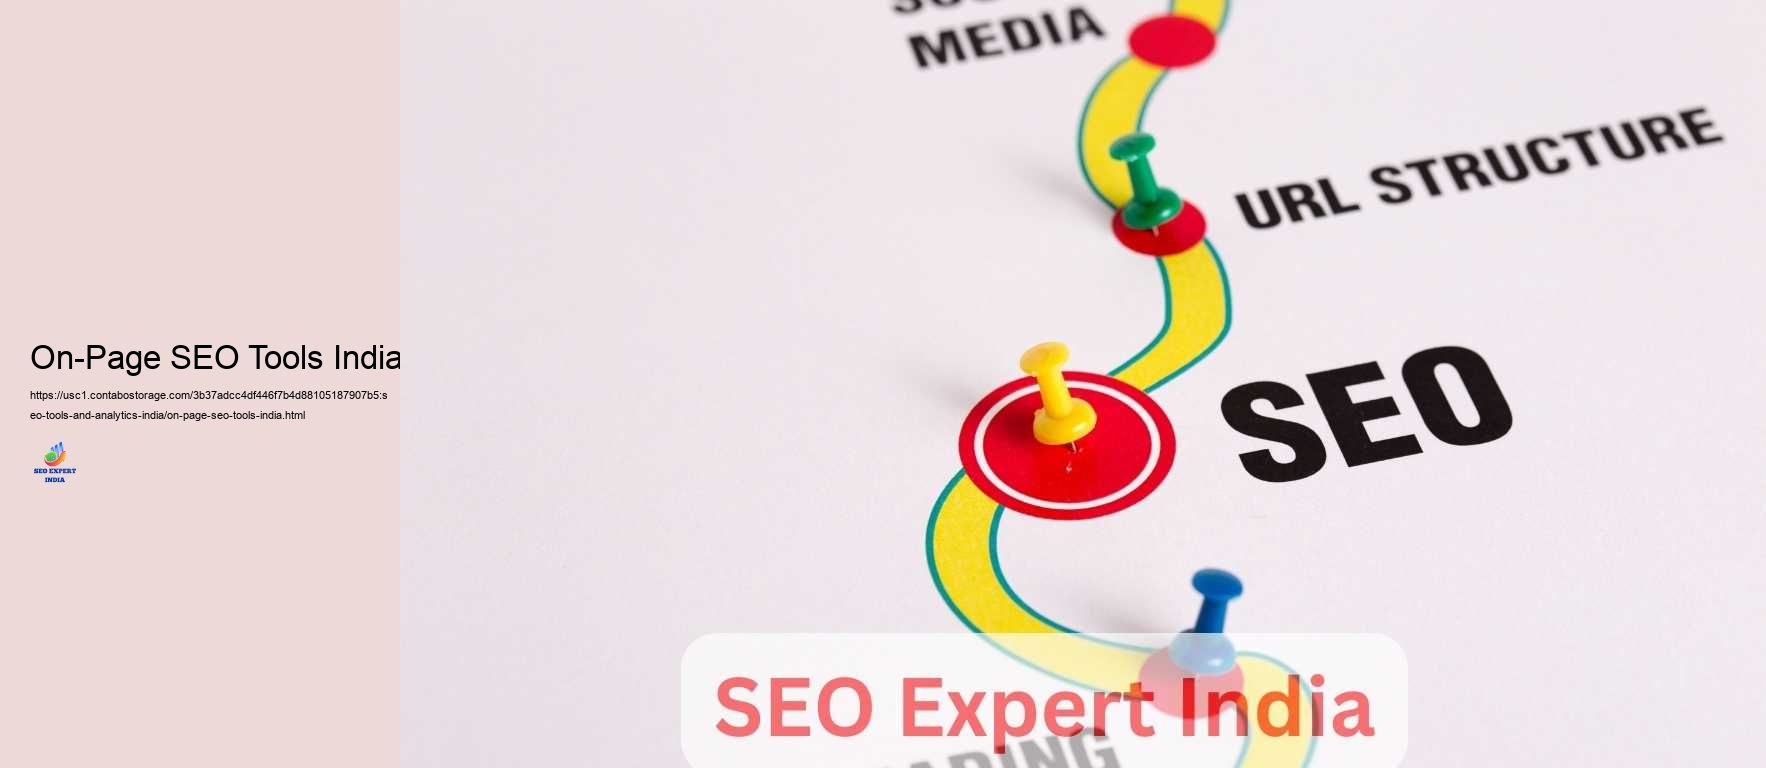 On-Page SEO Tools India